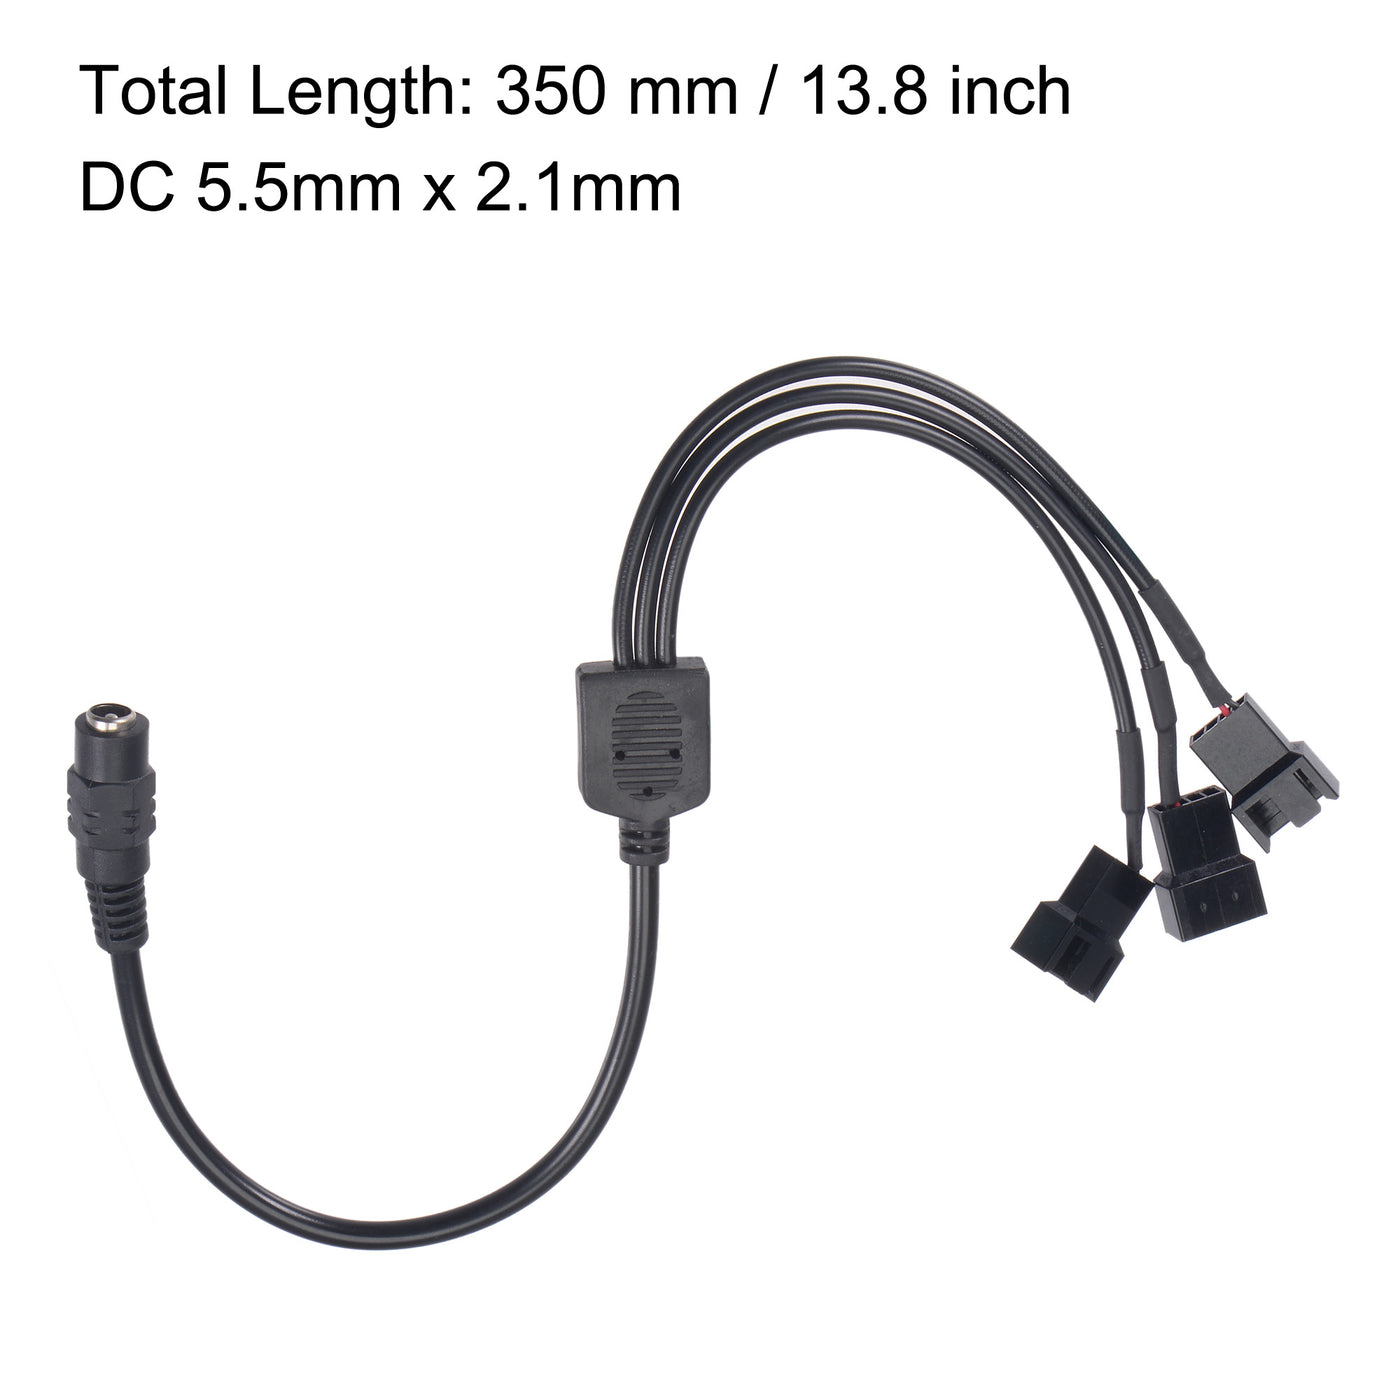 uxcell Uxcell Fan Power Supply Cable DC 5.5mmx2.1mm to 3 Port 3 Pin or 4 Pin Output 13.8 Inch